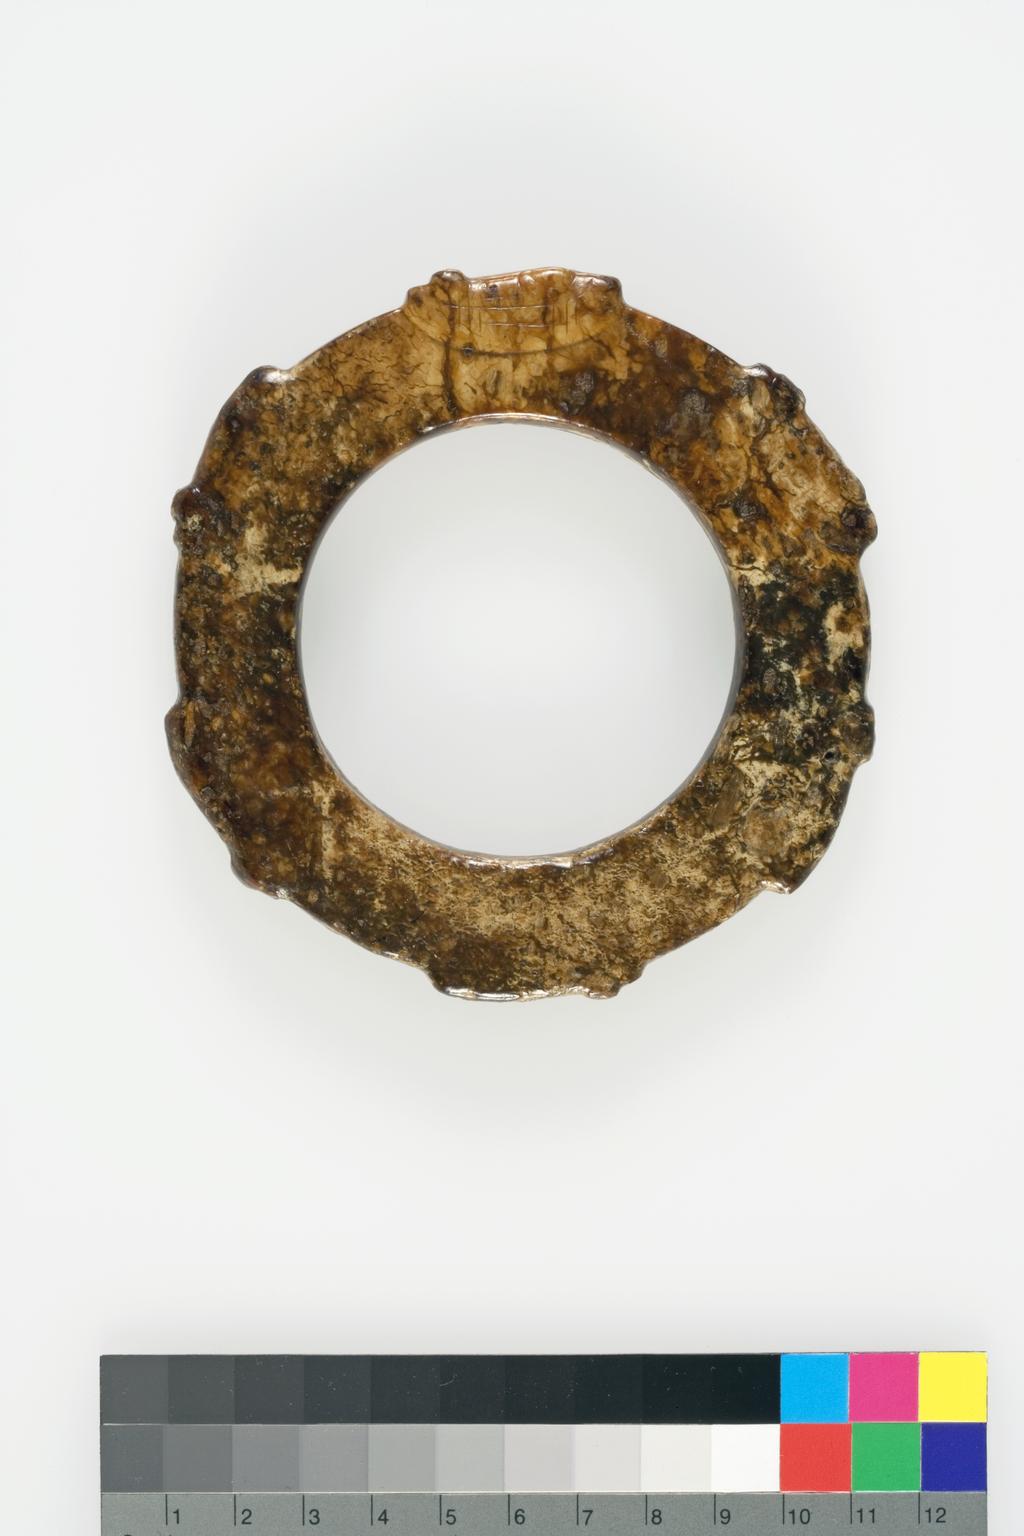 An image of Bracelet. This bracelet is dark brown opaque stone with areas of russet, grey and yellow. Six semi-circles in relief embrace eyes, perhaps representing cicadas enliven the surface of this bracelet. However, it was copied from an early 20th century print Tao zhai gu yu tu (Ancient Jade Illustrations from the Tao’s Studio by Duan Fang, 1861-1911). Nephrite, diameter, 10.8 cm, 1850-1900. Chinese.